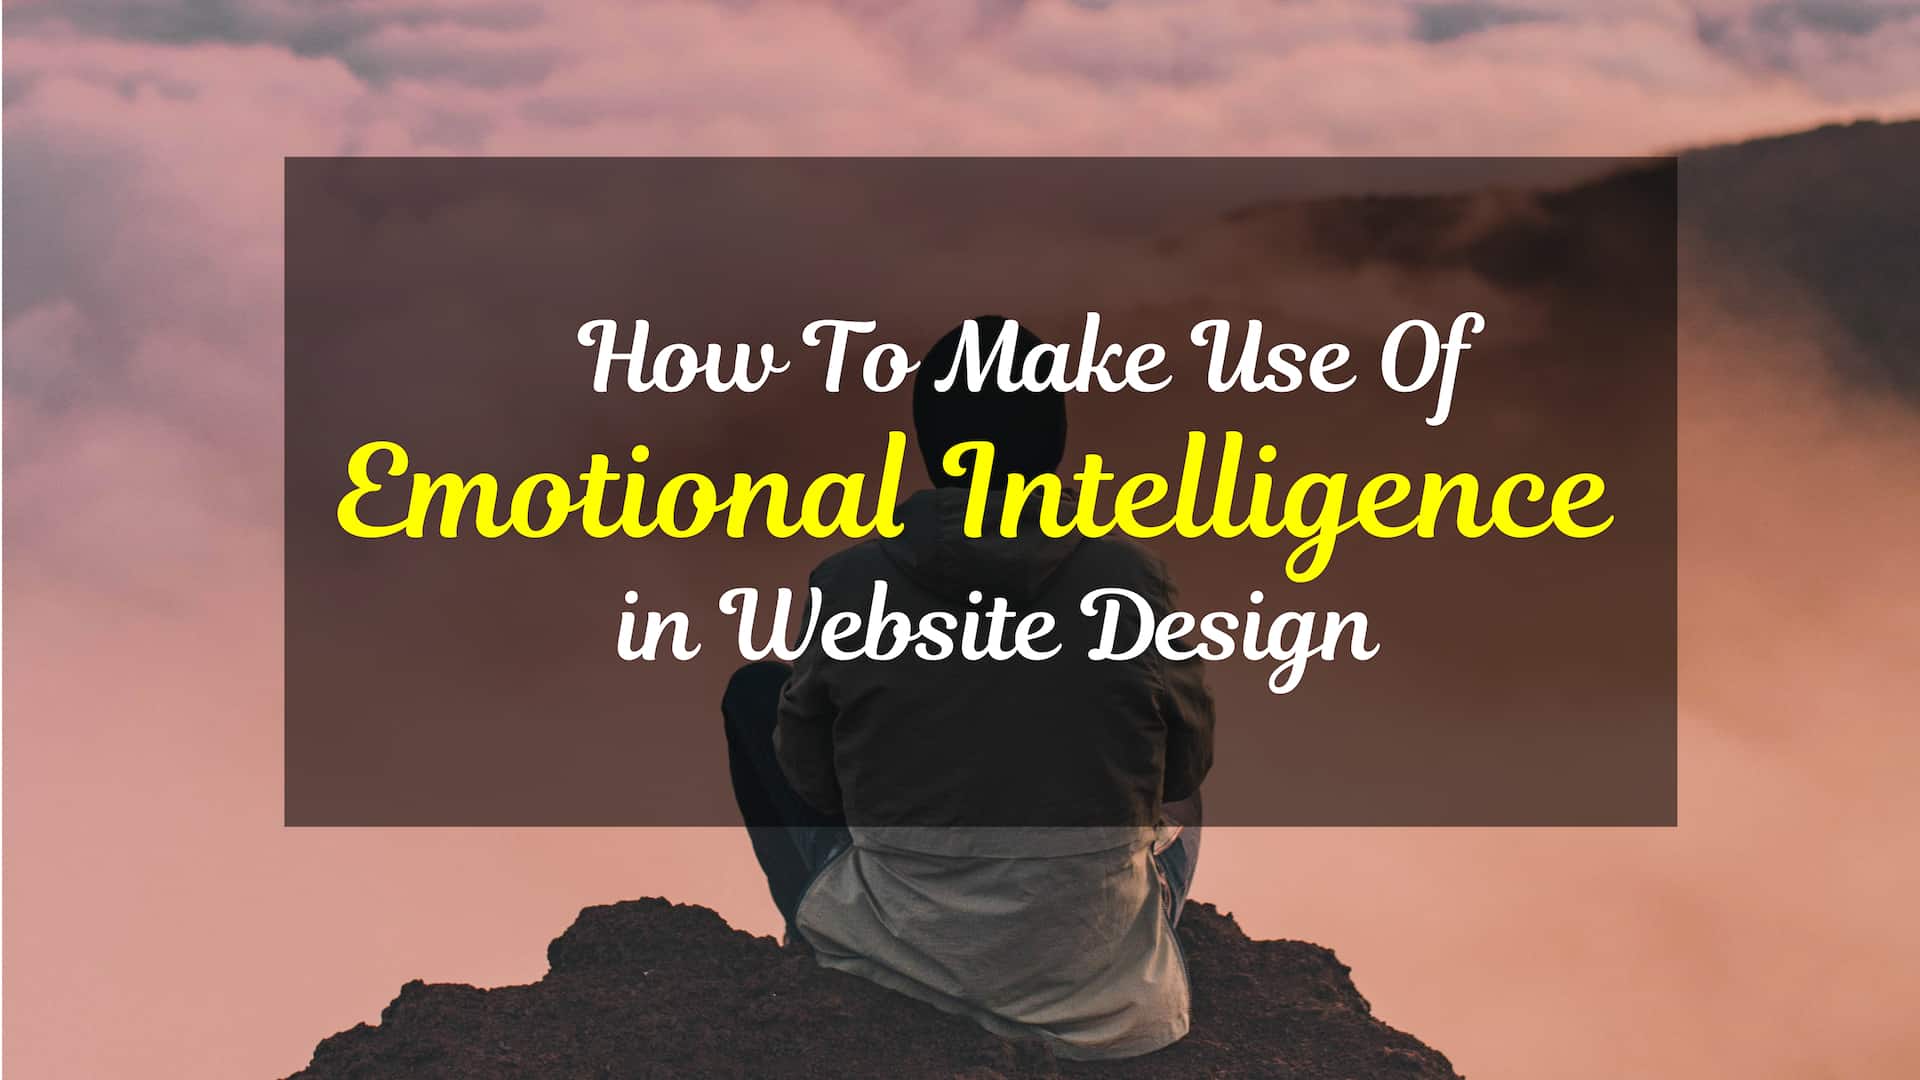 Emotional Intelligence In Web Design. What It Is, Why You Need It & How to Get It